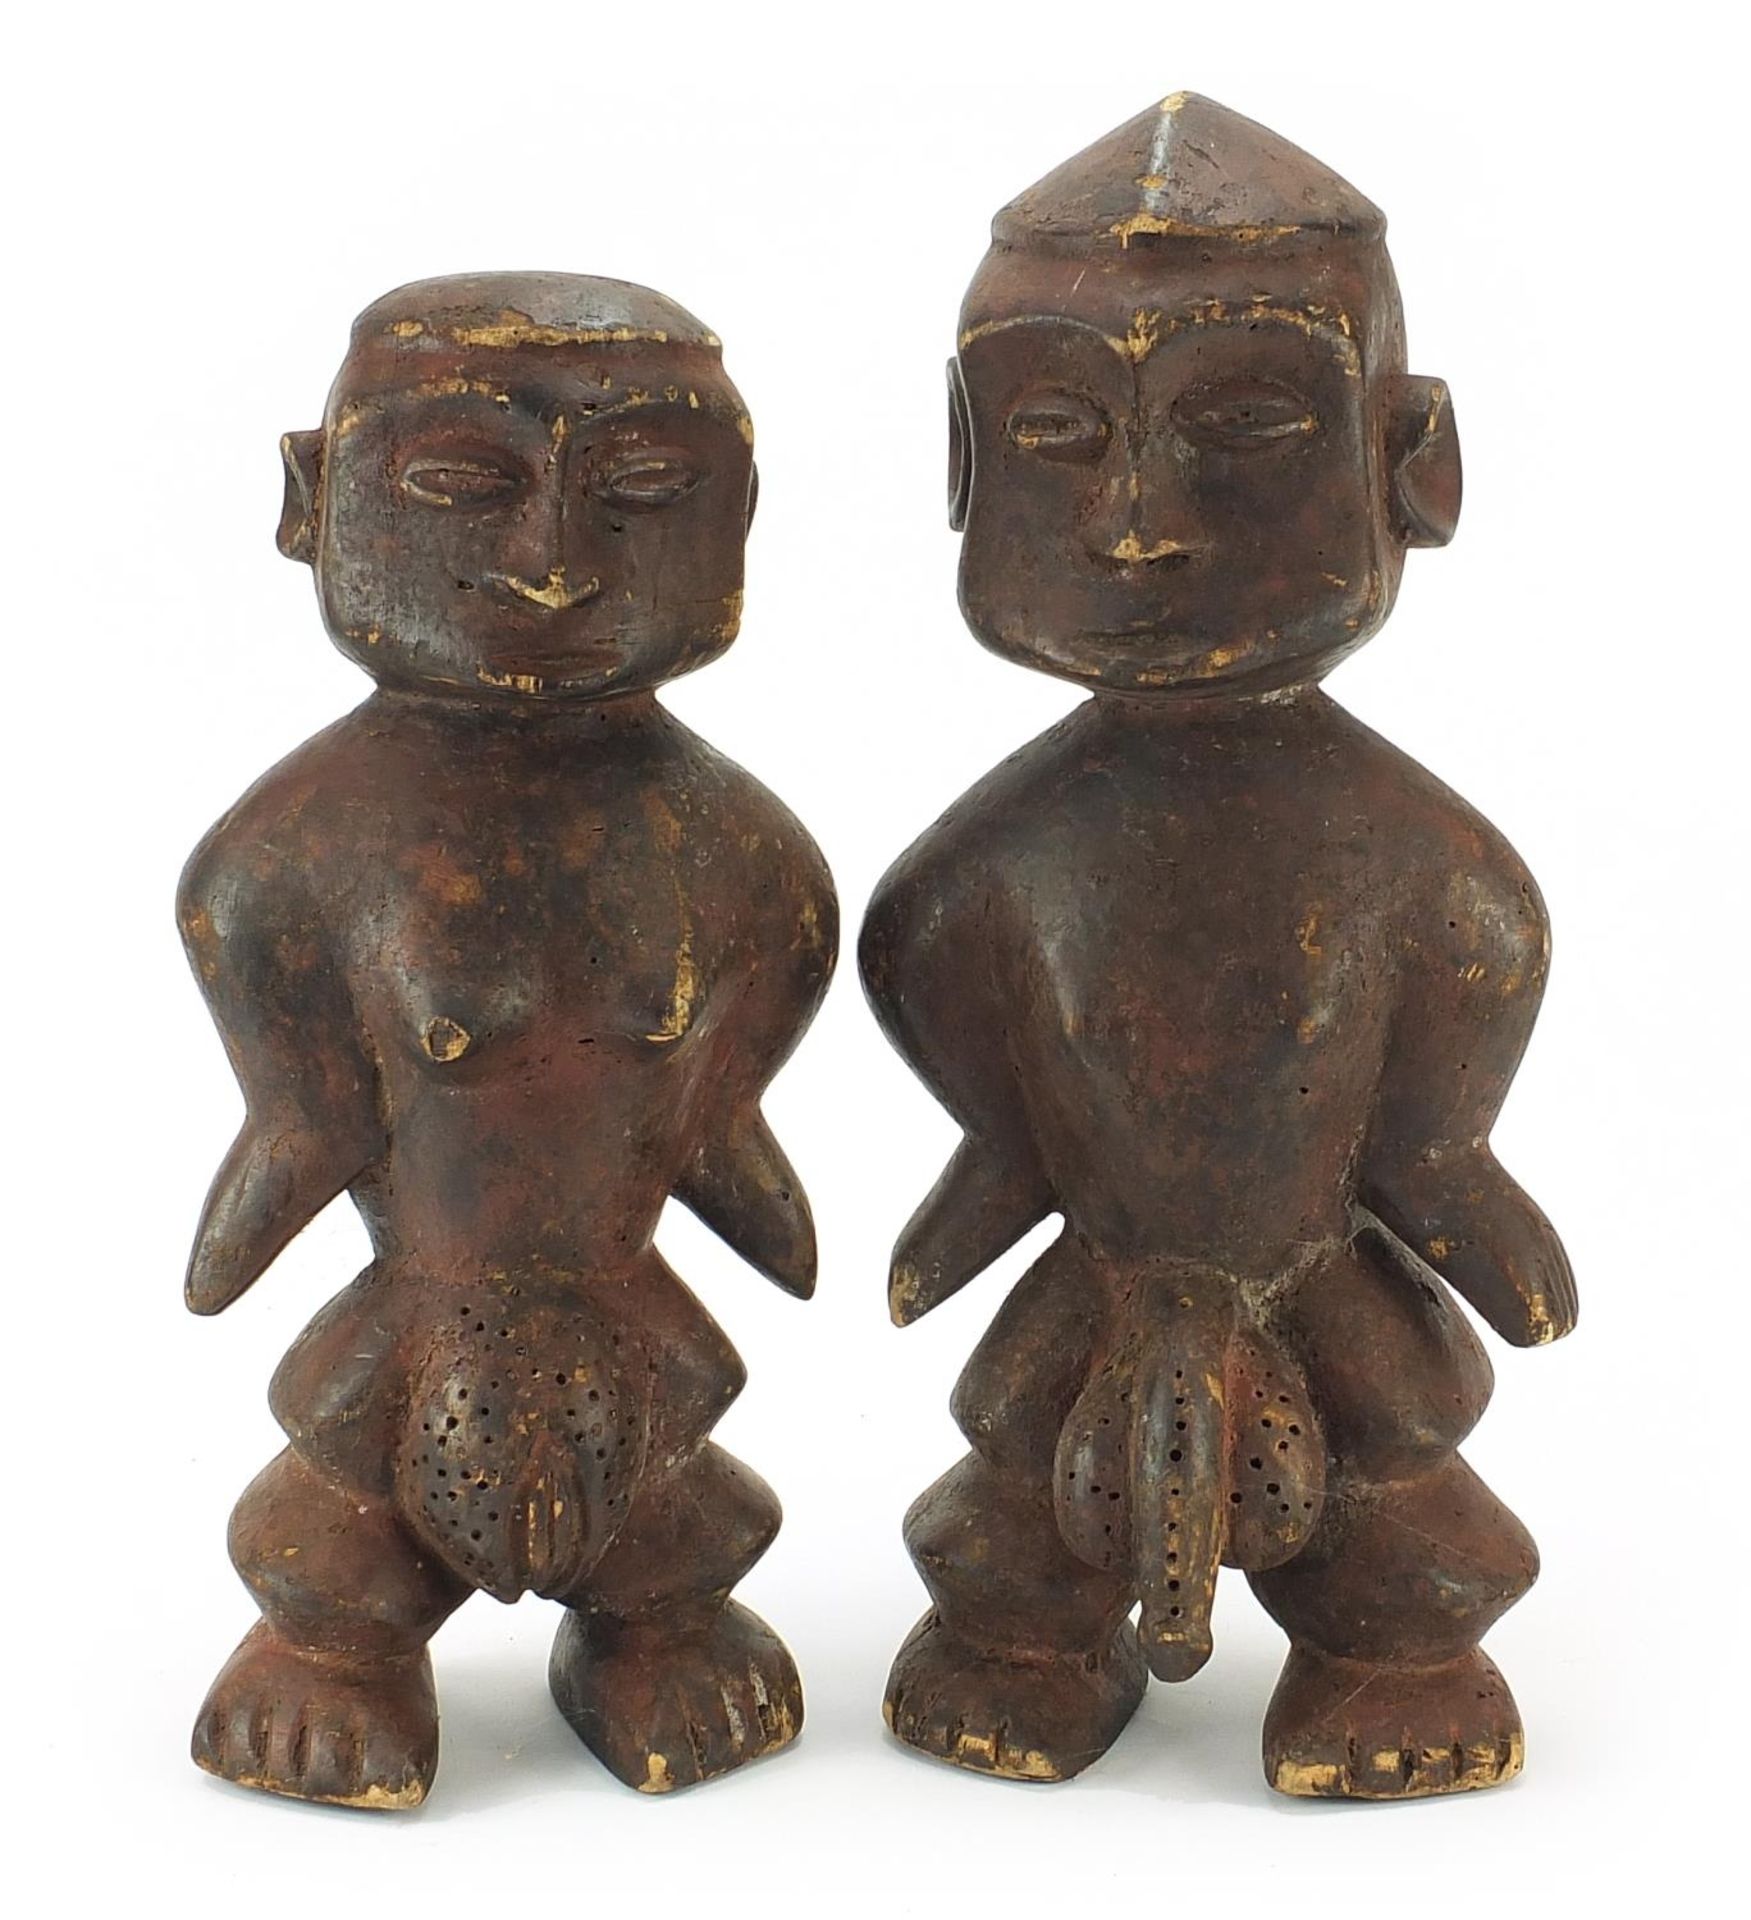 Pair of tribal interest carved hardwood fertility figures, the largest 50cm high